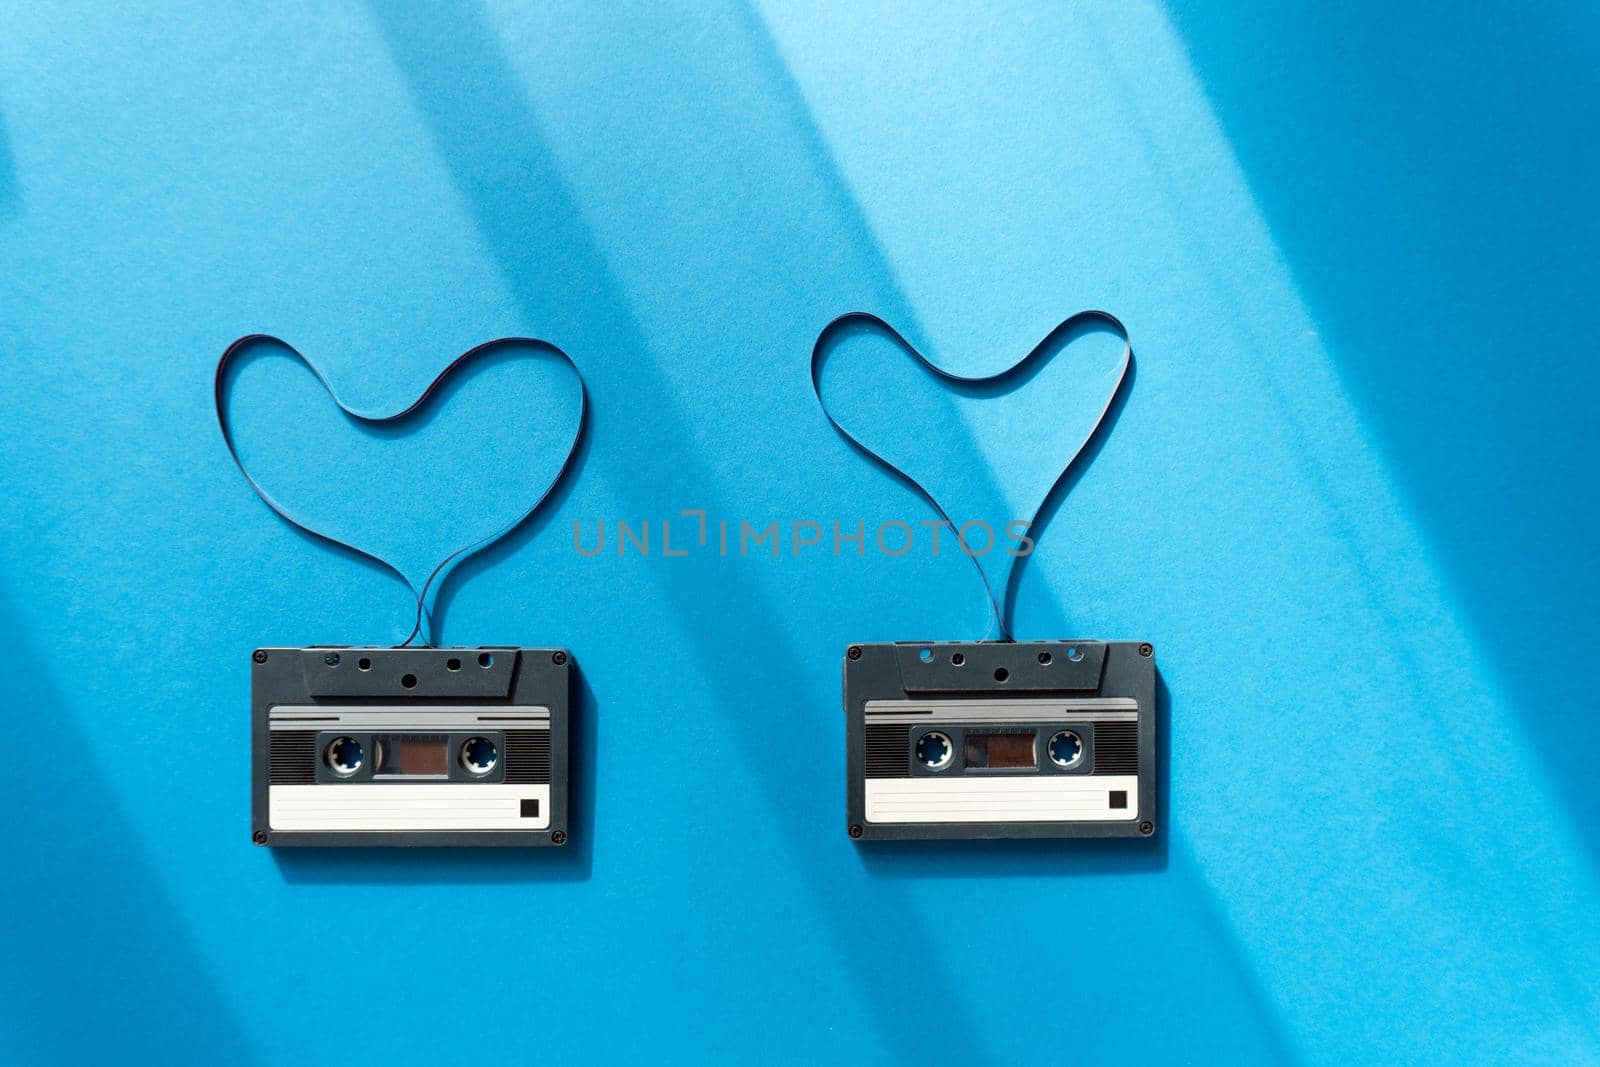 cassettes with magnetic tape in the shape of heart on blue background by uveita